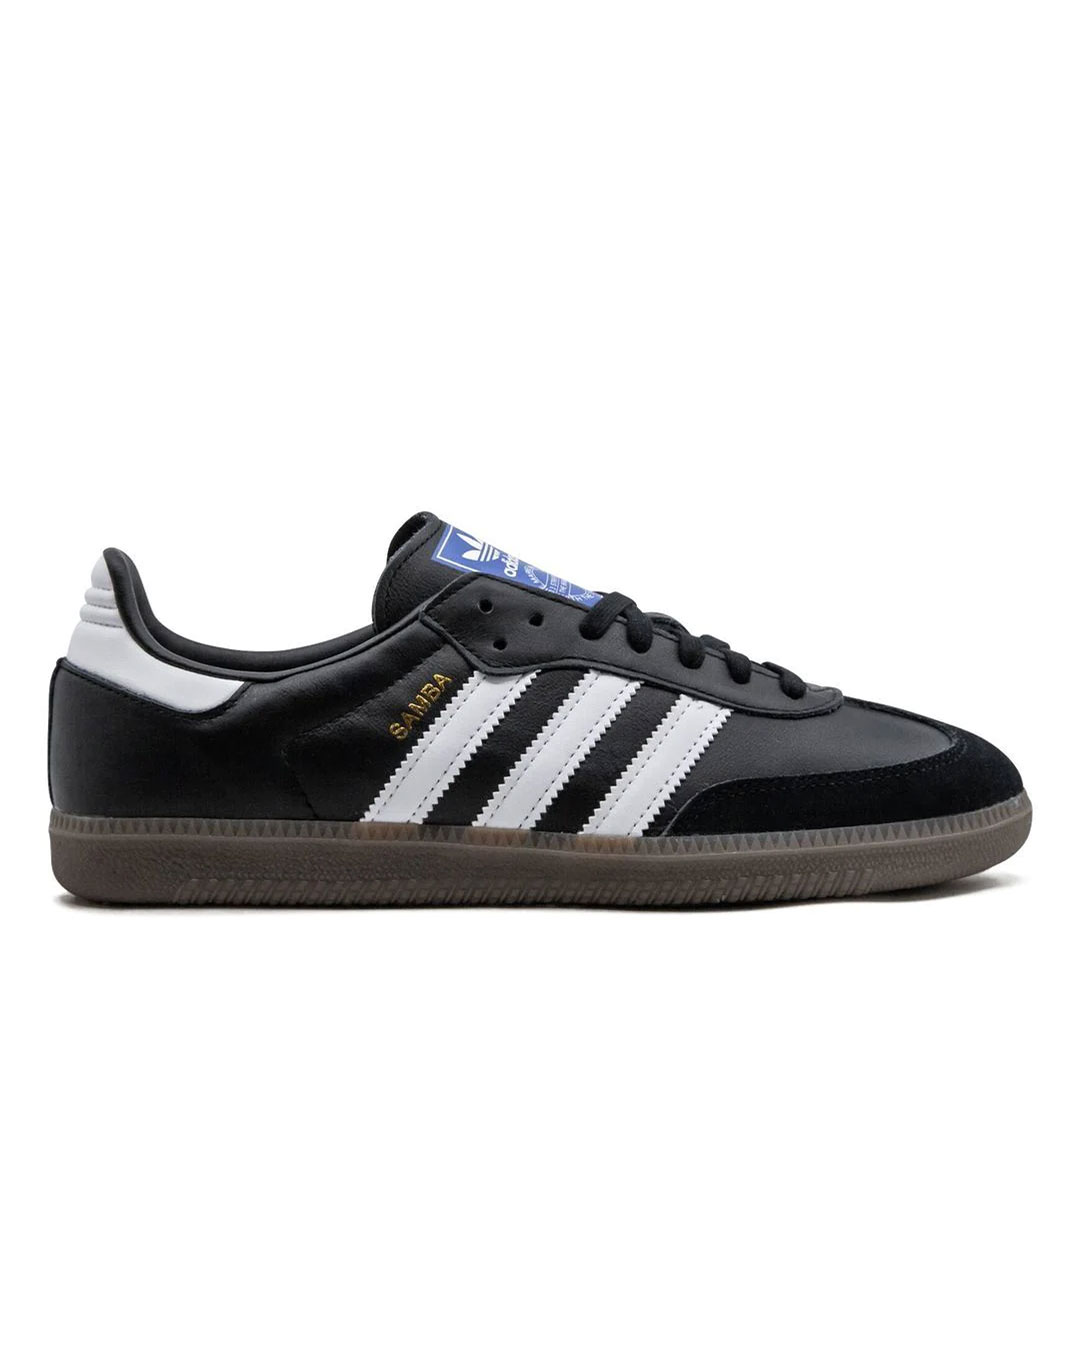 adidas samba sneakers in black and white